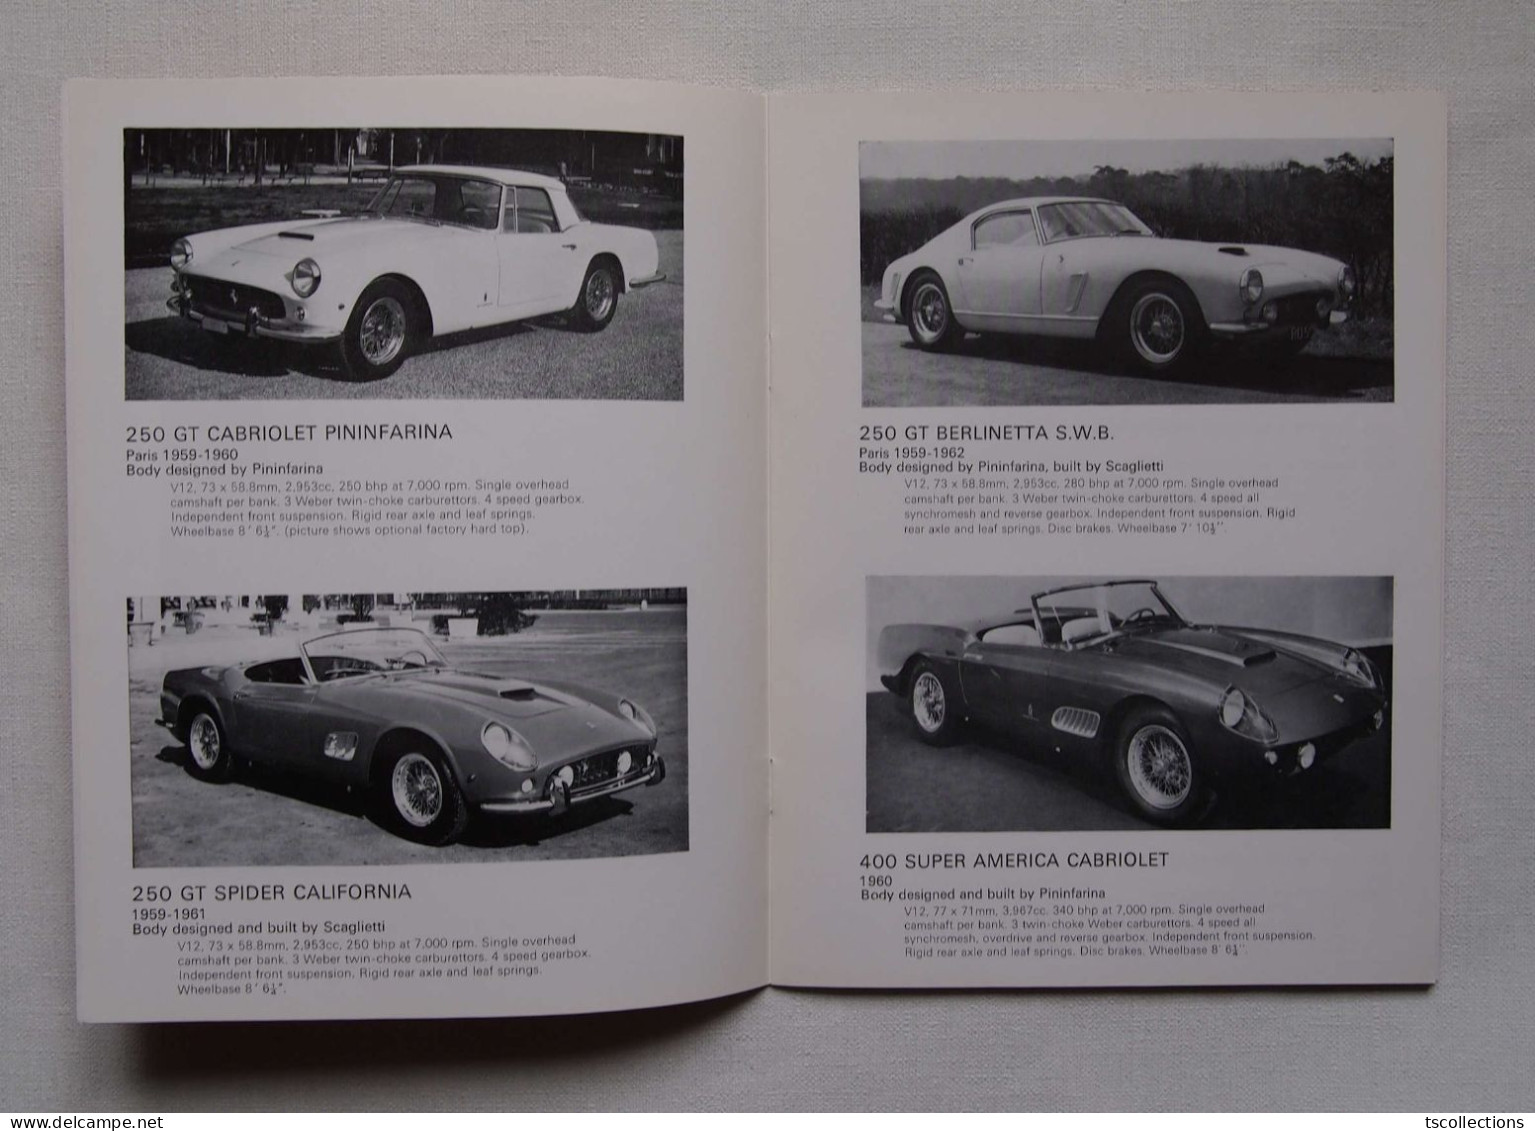 Ferrari Guide To Cars Since 1959 - Books On Collecting